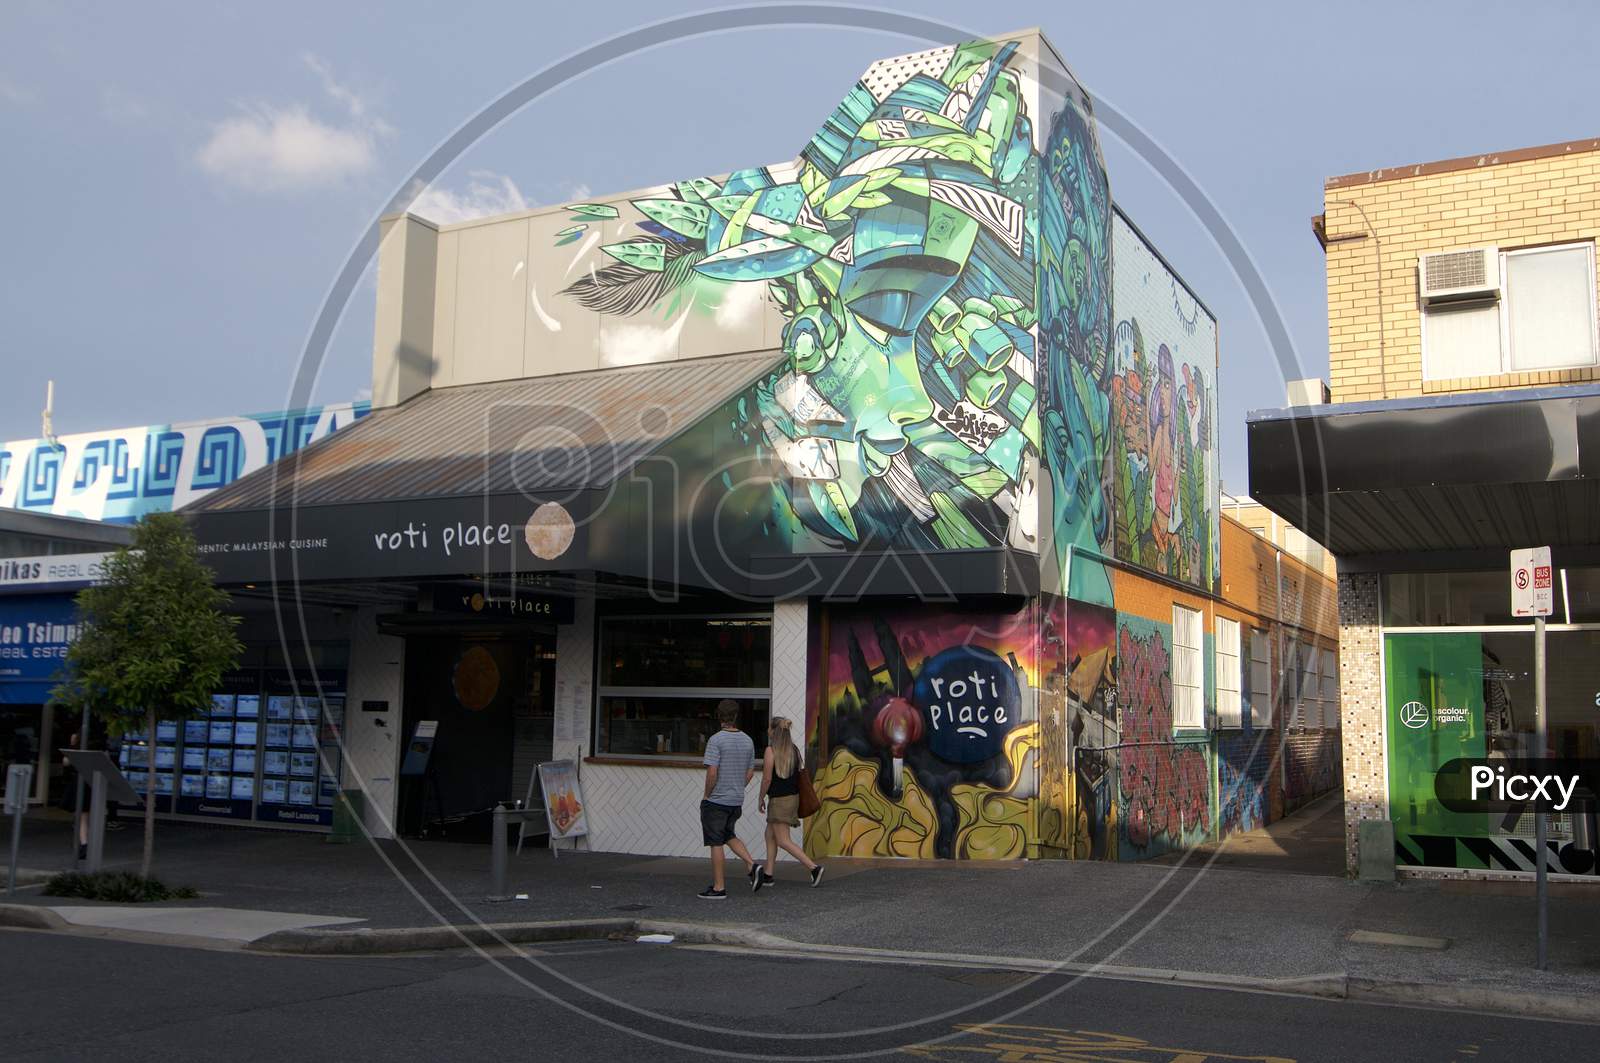 Beautiful Street View Of Boundary St. And Mural On A Building